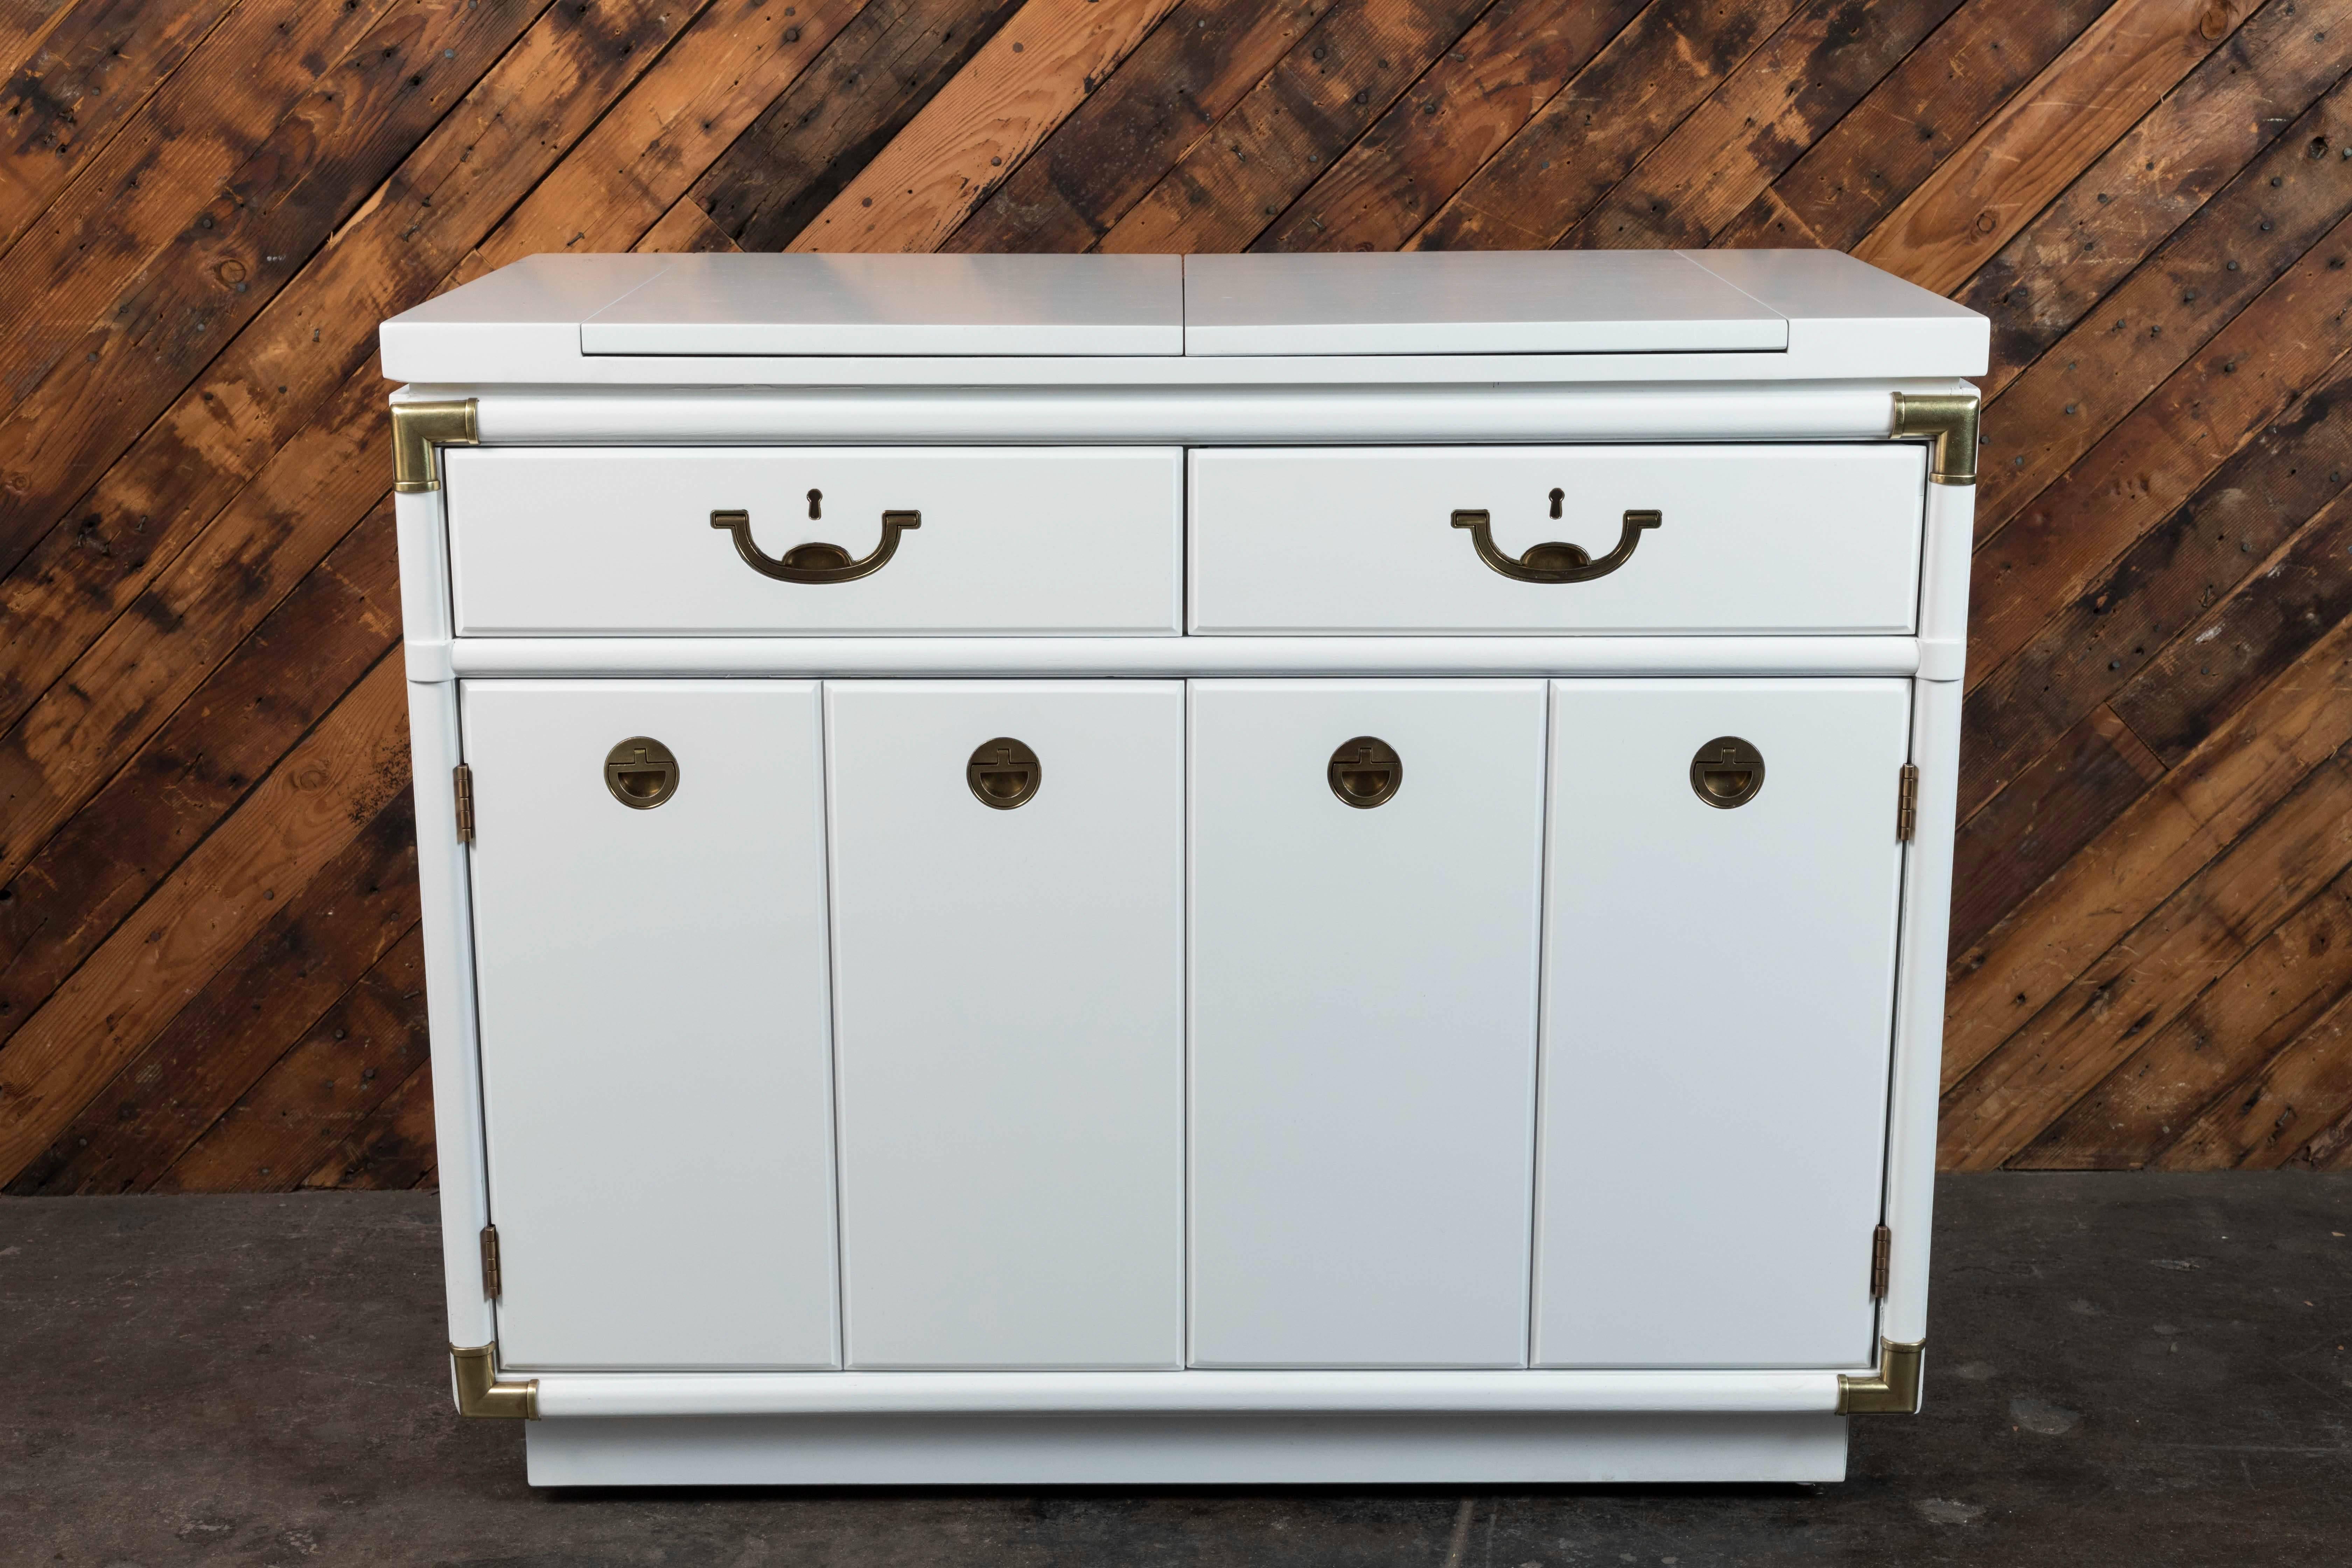 Gorgeous midcentury Campaign style rolling bar cabinet from the Drexel Accolade collection. Has two leaves that flip open. Plenty of storage. Note key holes are simply decorative. Has just been lacquer painted white and brass has been polished. When